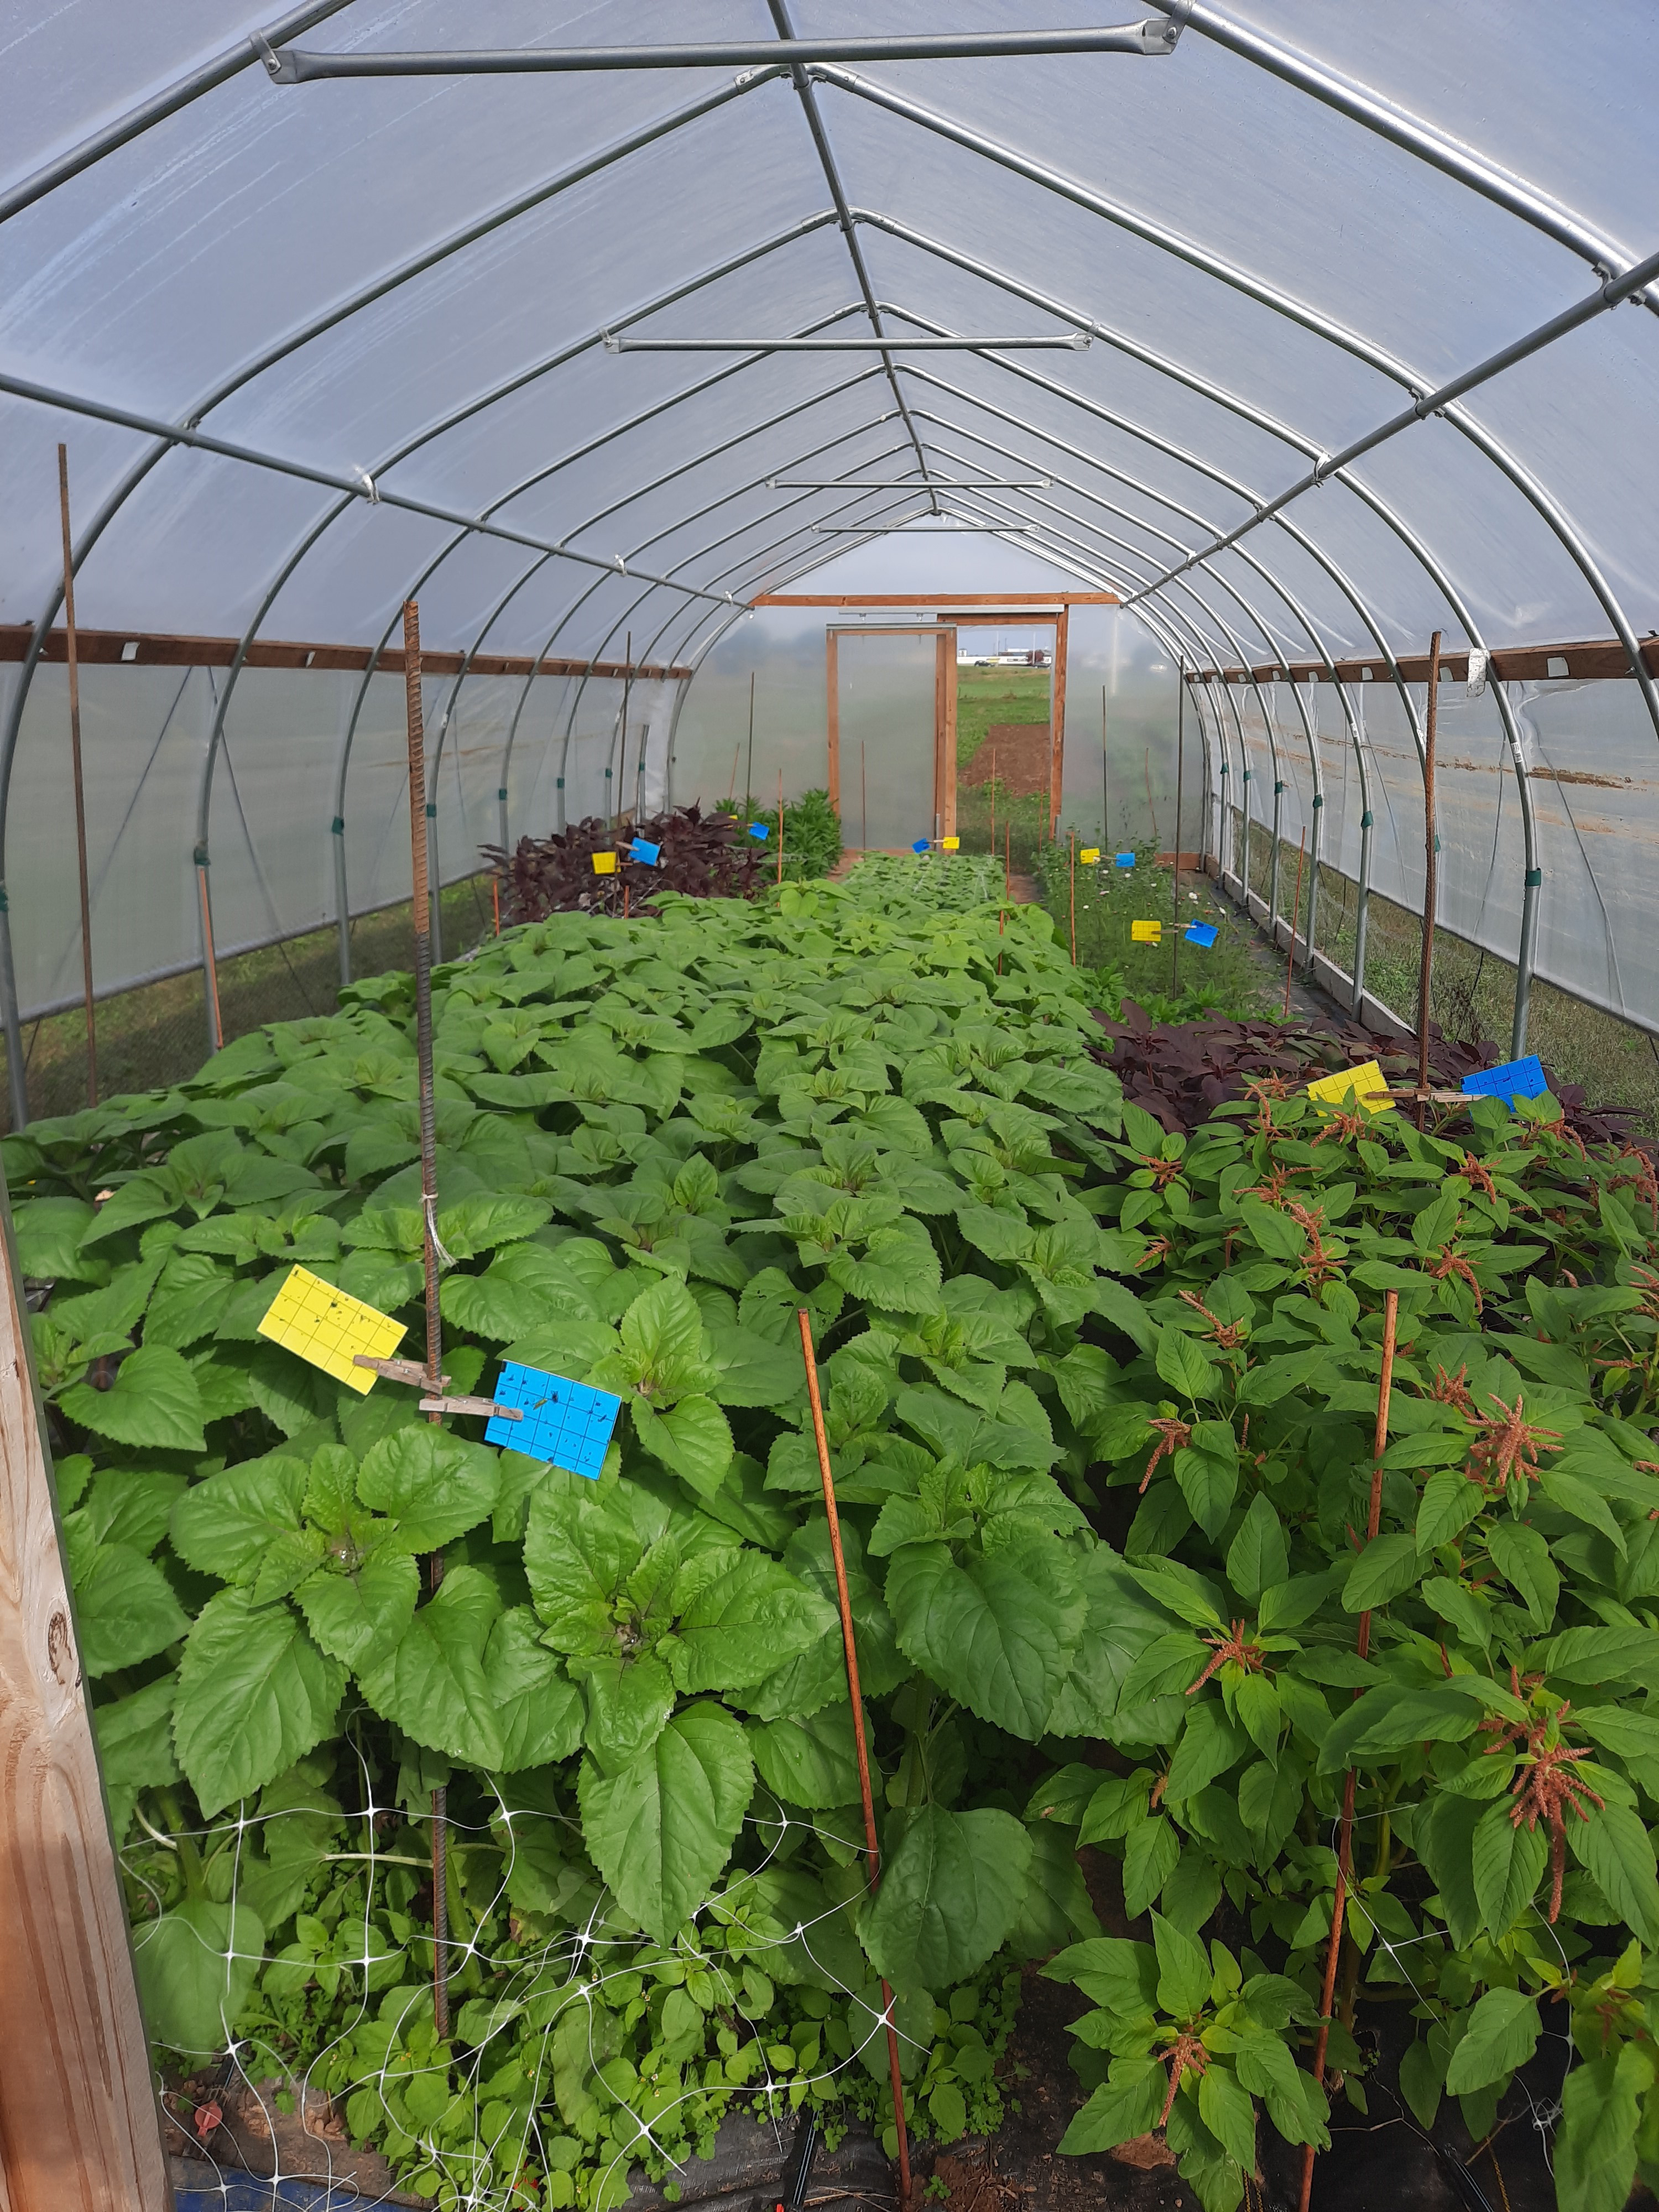 Sunflowers, zinnias, strawflowers, cosmos and two varieties of amaranth growing in a high tunnel are part of Rachel Rudolph's study on the Guinn farm in Boyle County. Photo by Rachel Rudolph